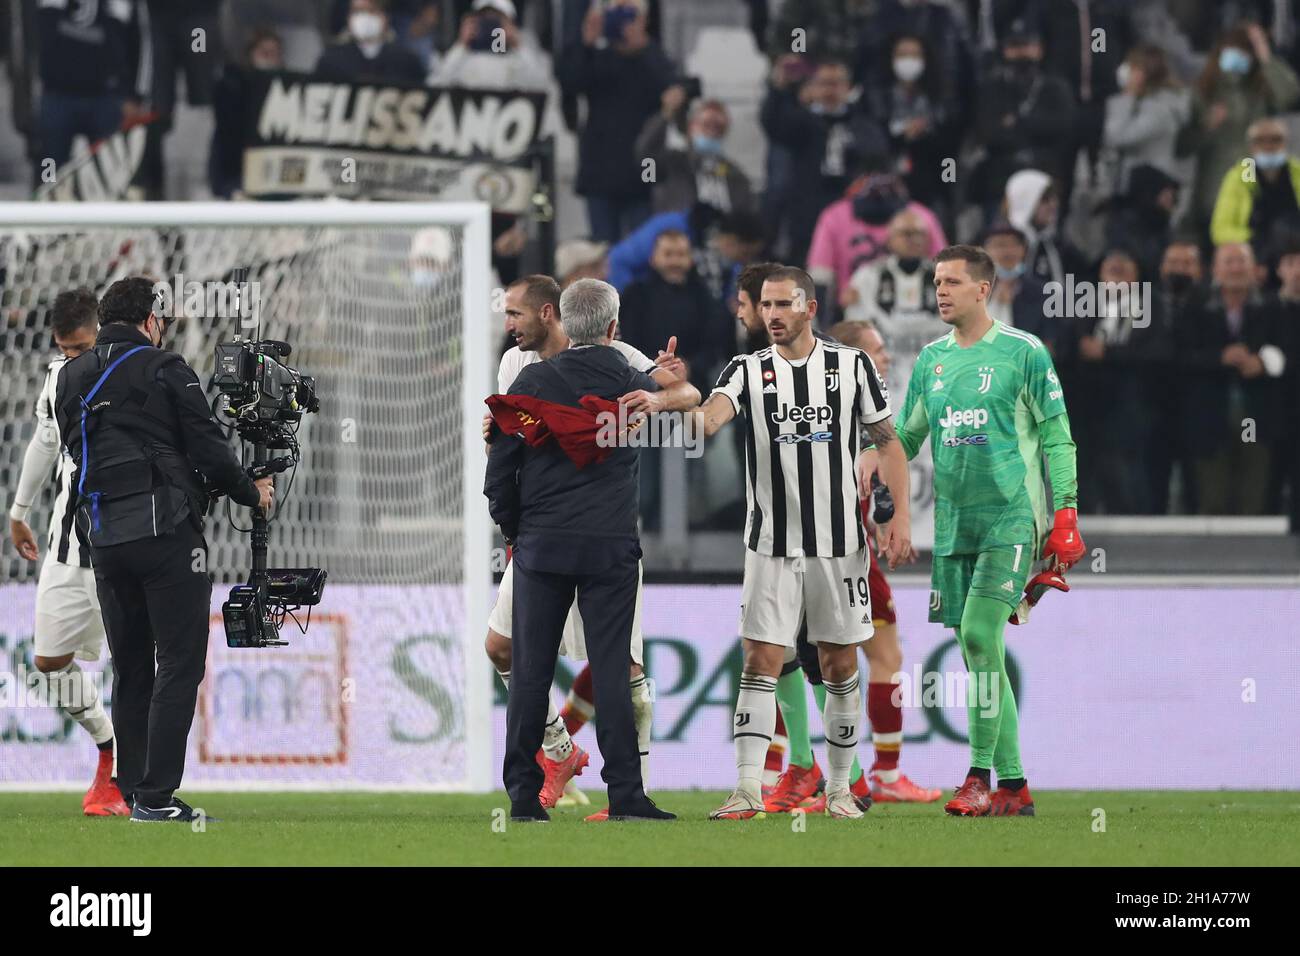 Turin, Italy. 17th Oct, 2021. Wojciech Szczesny of Juventus looks on as Jose Mourinho Head coach of AS Roma shakes hands with Leonardo Bonucci of Juventus as he is embraced by Giorgio Chiellini of Juventus following the final whistle of the Serie A match at Allianz Stadium, Turin. Picture credit should read: Jonathan Moscrop/Sportimage Credit: Sportimage/Alamy Live News Stock Photo